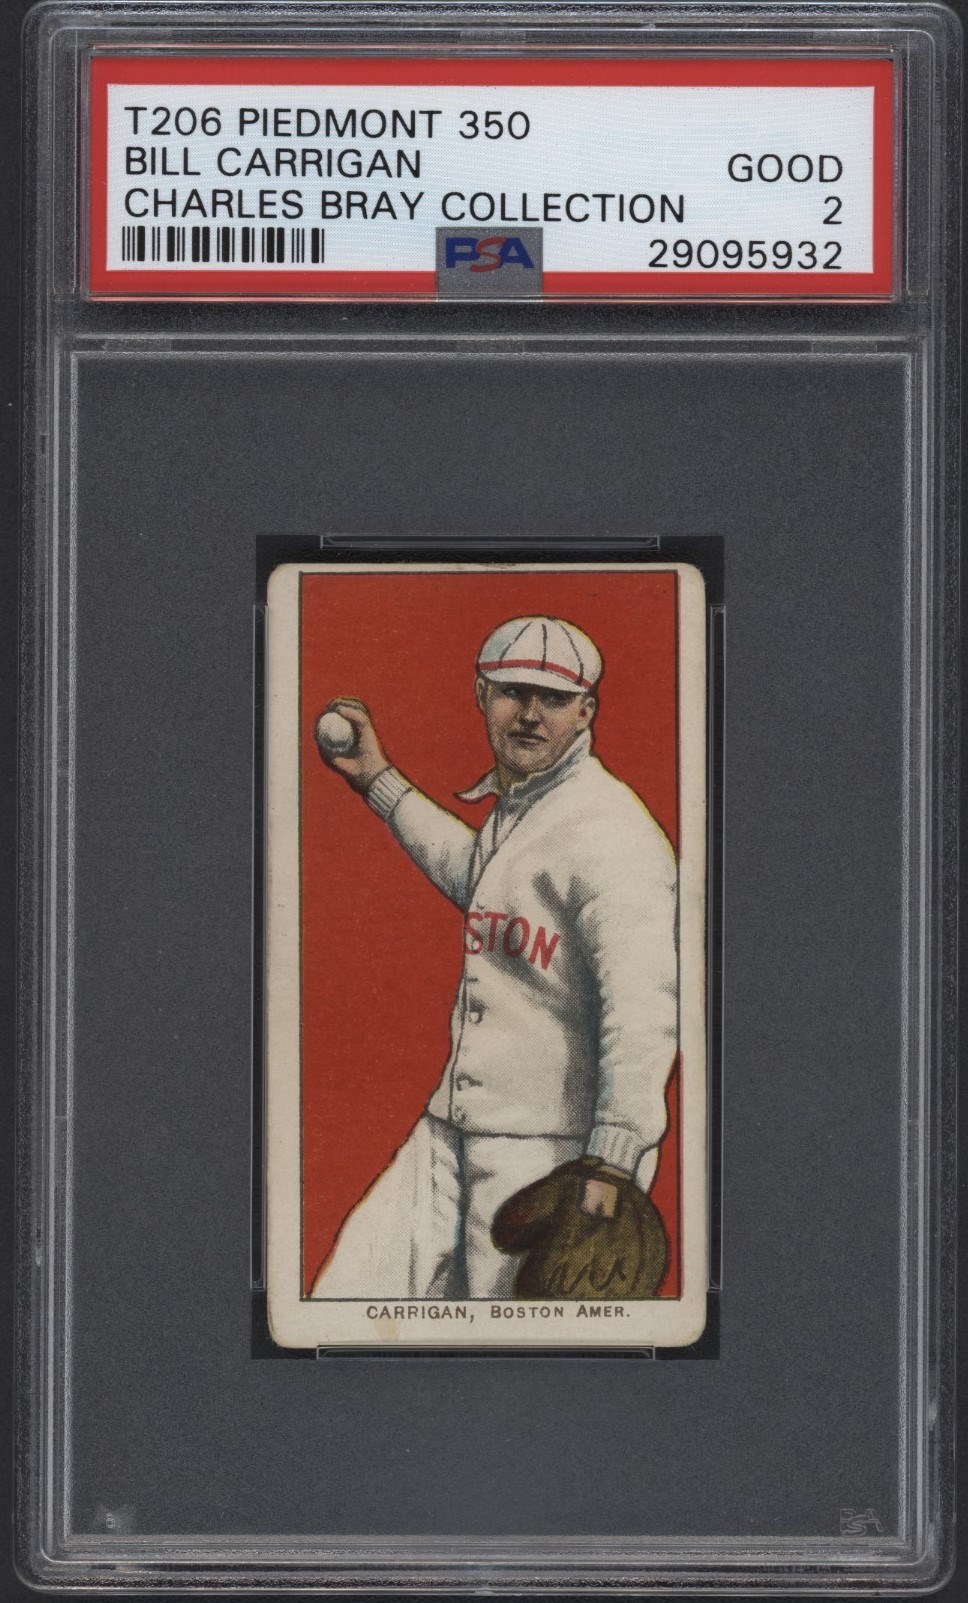 Baseball and Trading Cards - T206 Piedmont 350 Bill Carrigan PSA 2 From the Charles Bray Collection